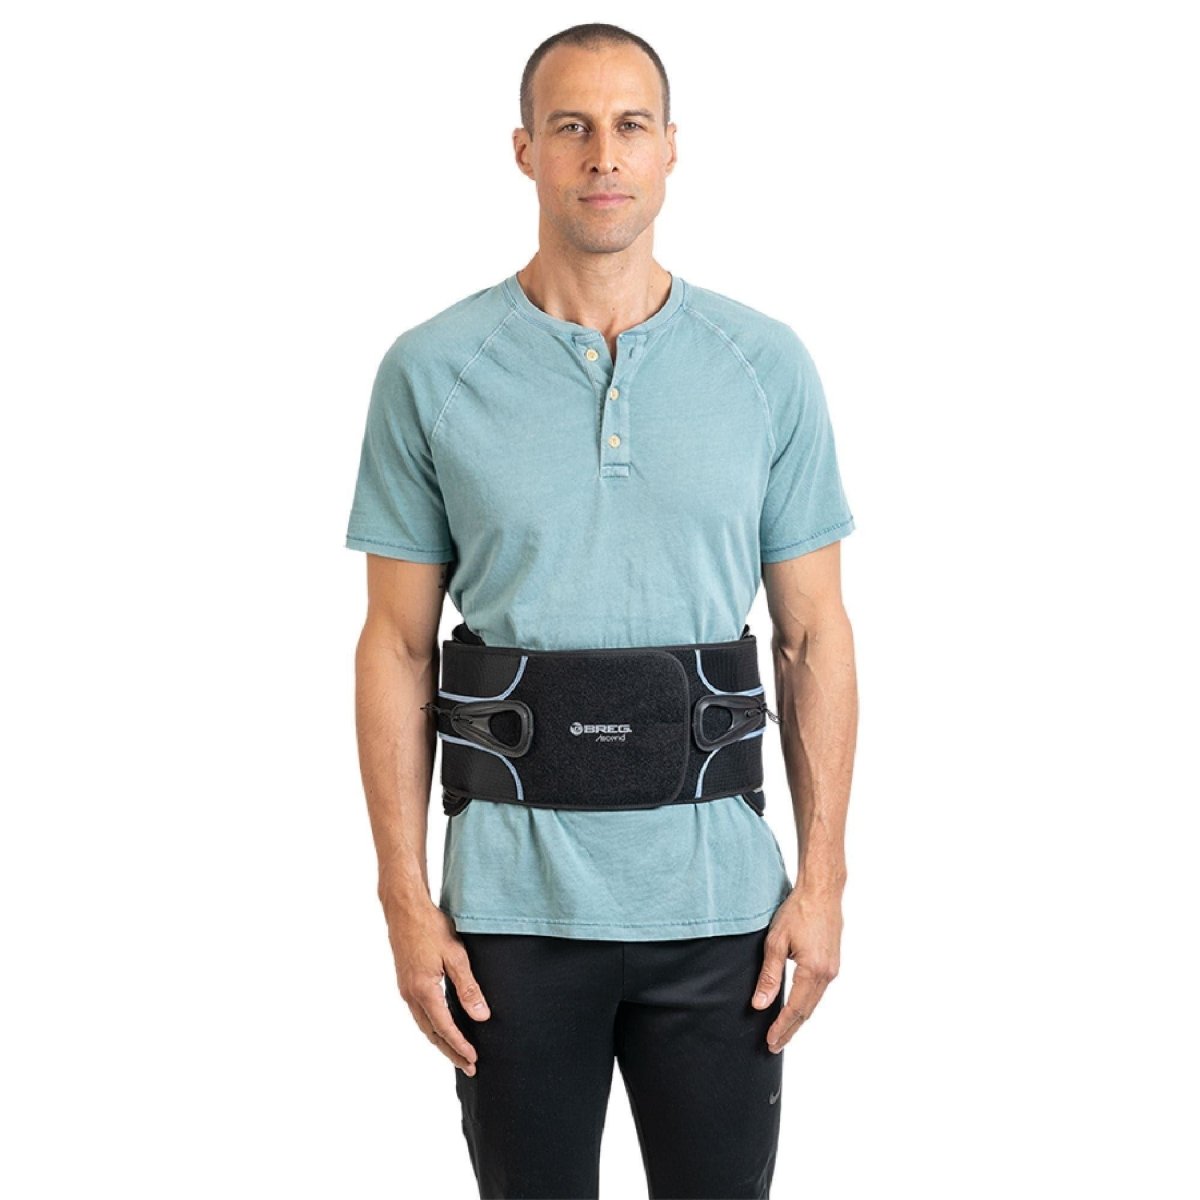 Back Pain Relief Posture Corrector Brace – The Evergreen Cart